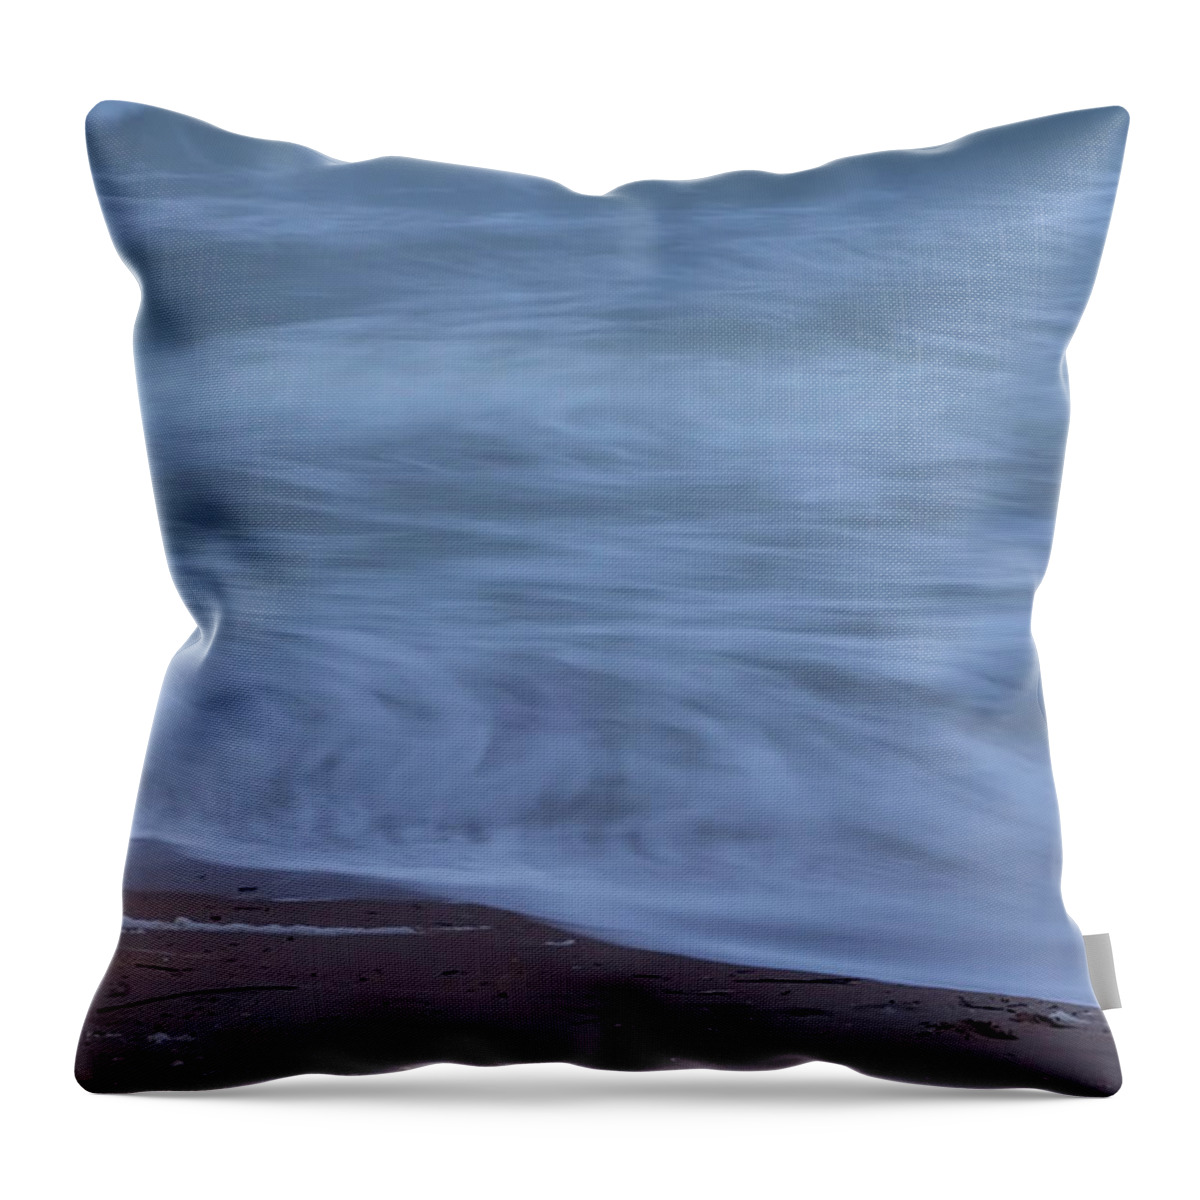 Barberville Roadside Yard Art And Produce Throw Pillow featuring the photograph Ocean Waves by Tom Singleton